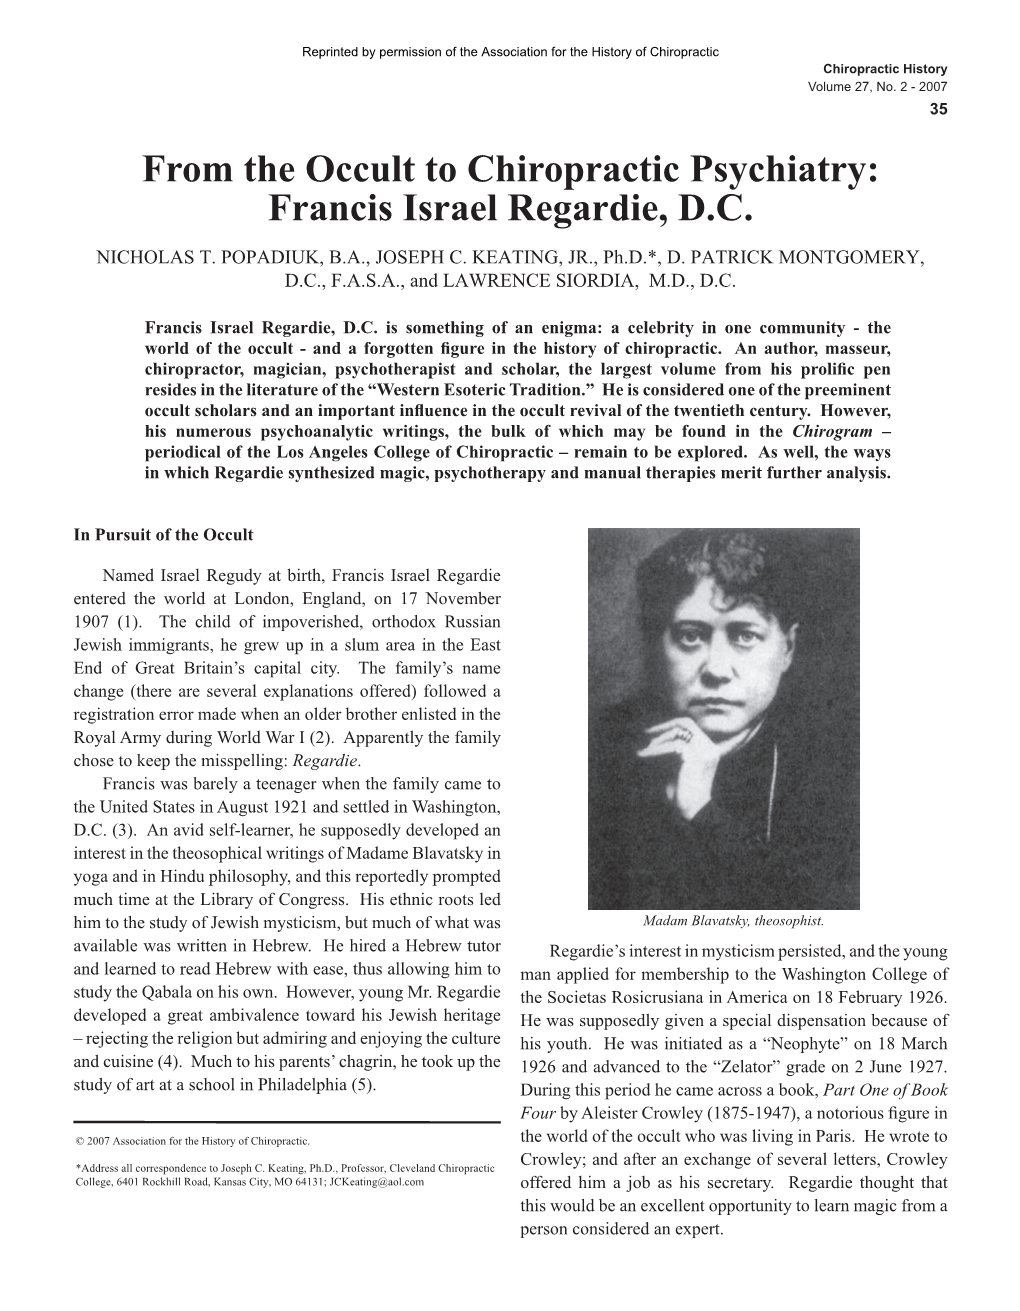 From the Occult to Chiropractic Psychiatry: Francis Israel Regardie, D.C